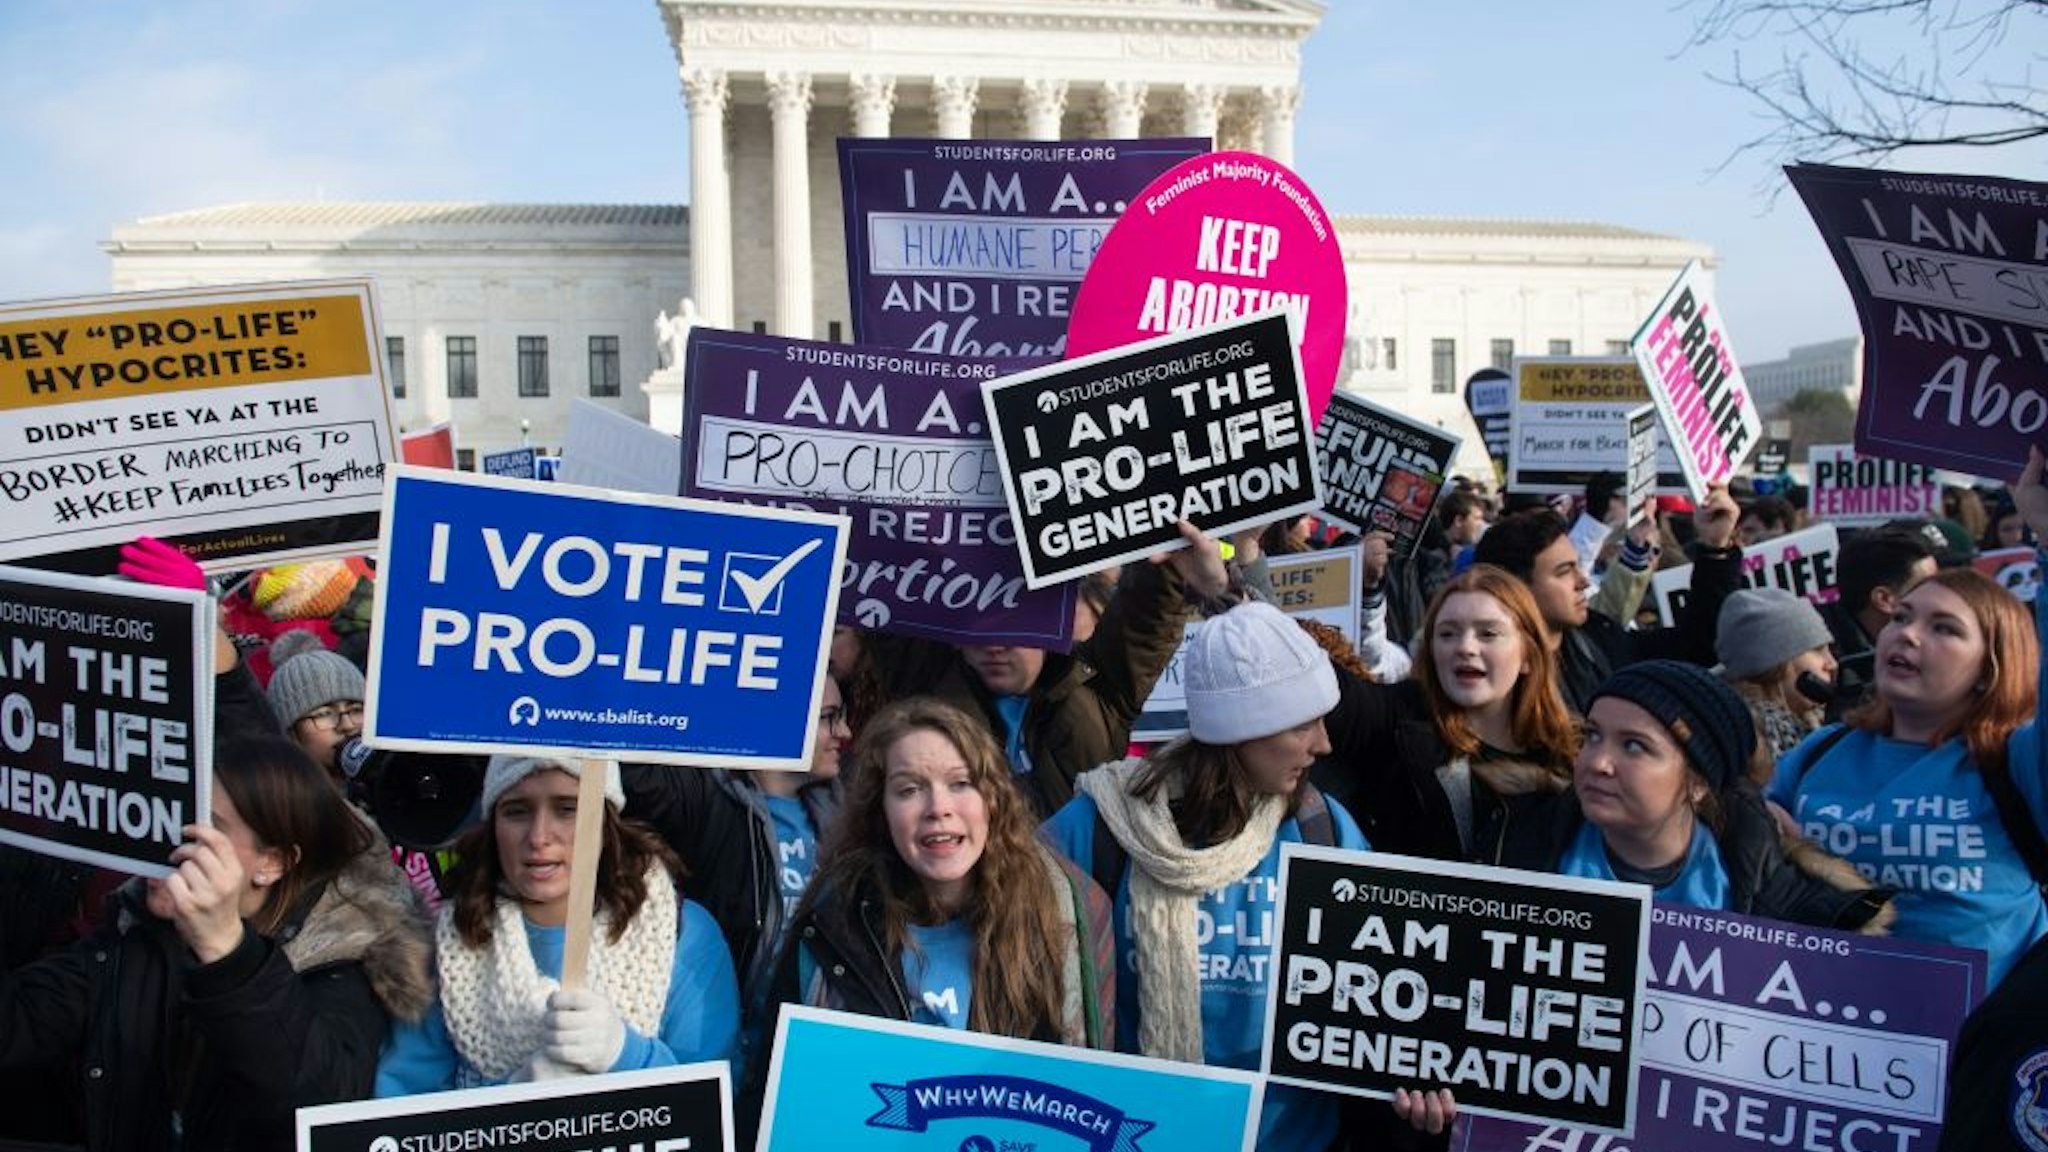 Pro-choice activists hold signs in response to anti-abortion activists participating in the "March for Life," an annual event to mark the anniversary of the 1973 Supreme Court case Roe v. Wade, which legalized abortion in the US, outside the US Supreme Court in Washington, DC, January 18, 2019. (Photo by SAUL LOEB / AFP) (Photo credit should read SAUL LOEB/AFP via Getty Images)